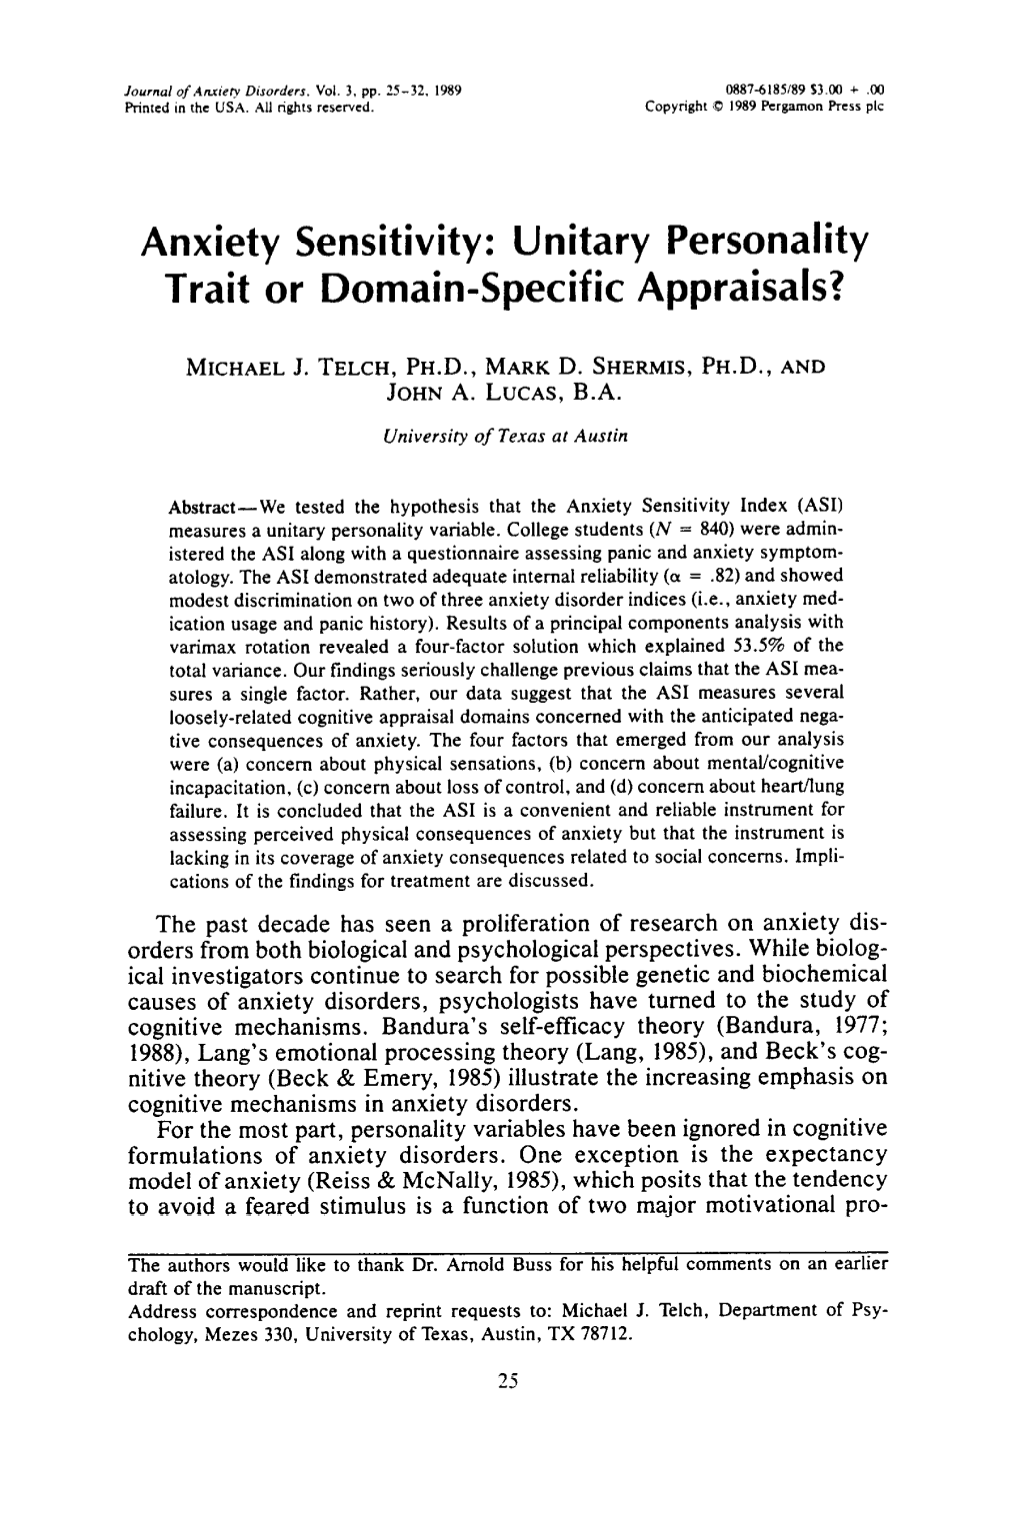 Anxiety Sensitivity: Unitary Personality Trait Or Domain-Specific Appraisals?